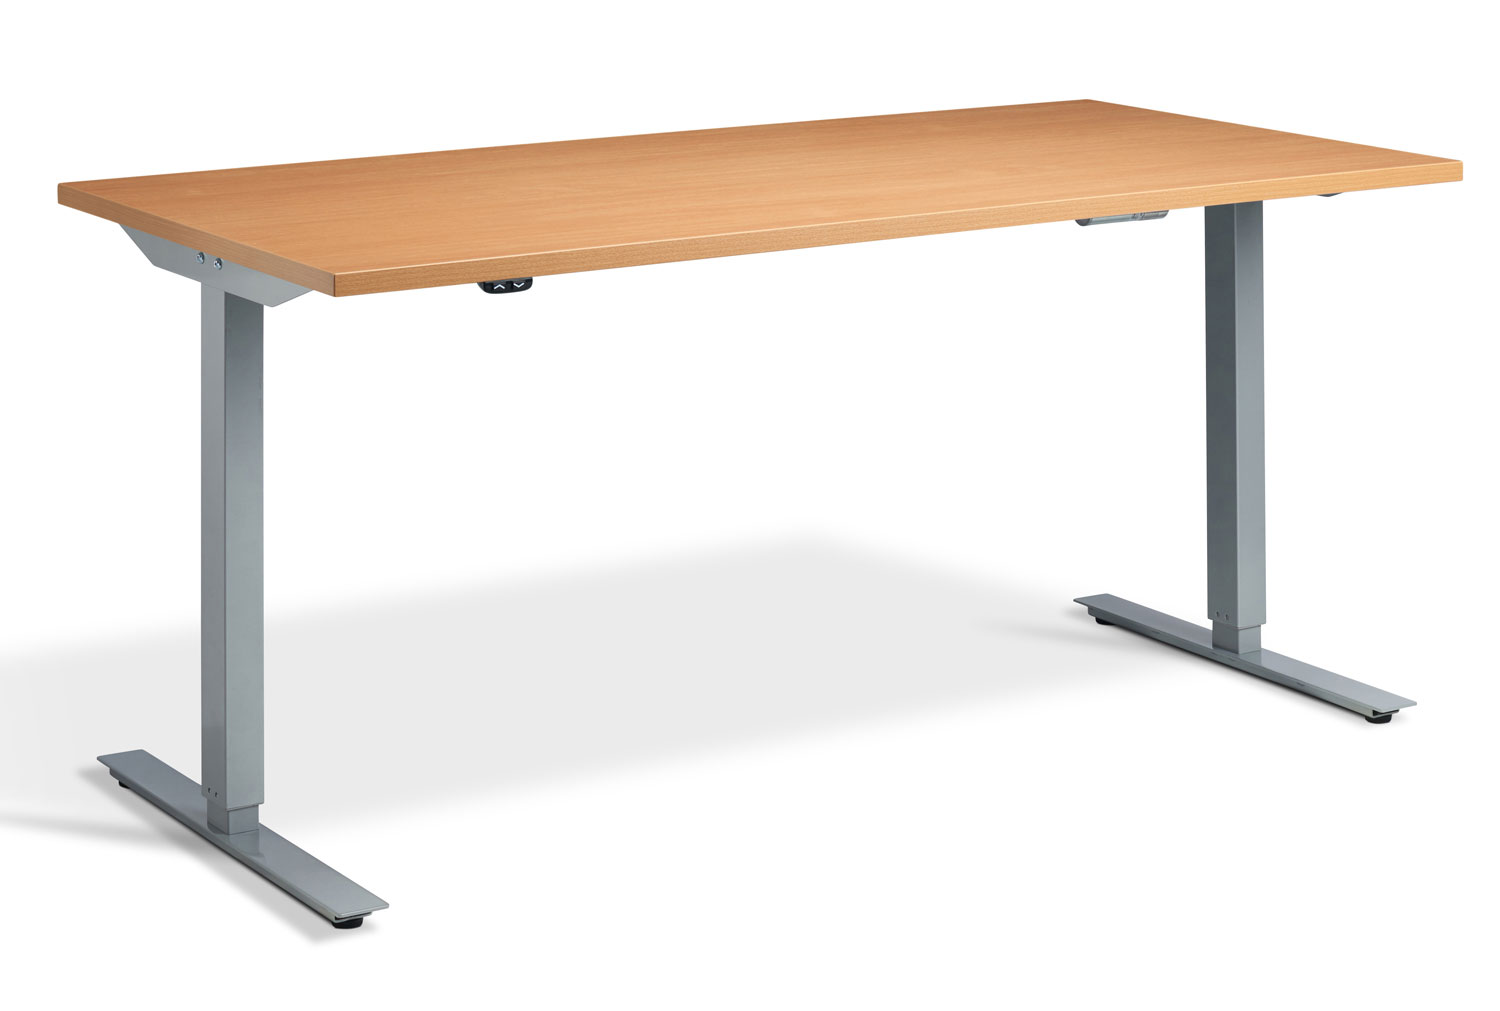 Calgary Dual Motor Height Adjustable Office Desk, 140wx80dx70-120h (cm), Silver Frame, Beech, Express Delivery